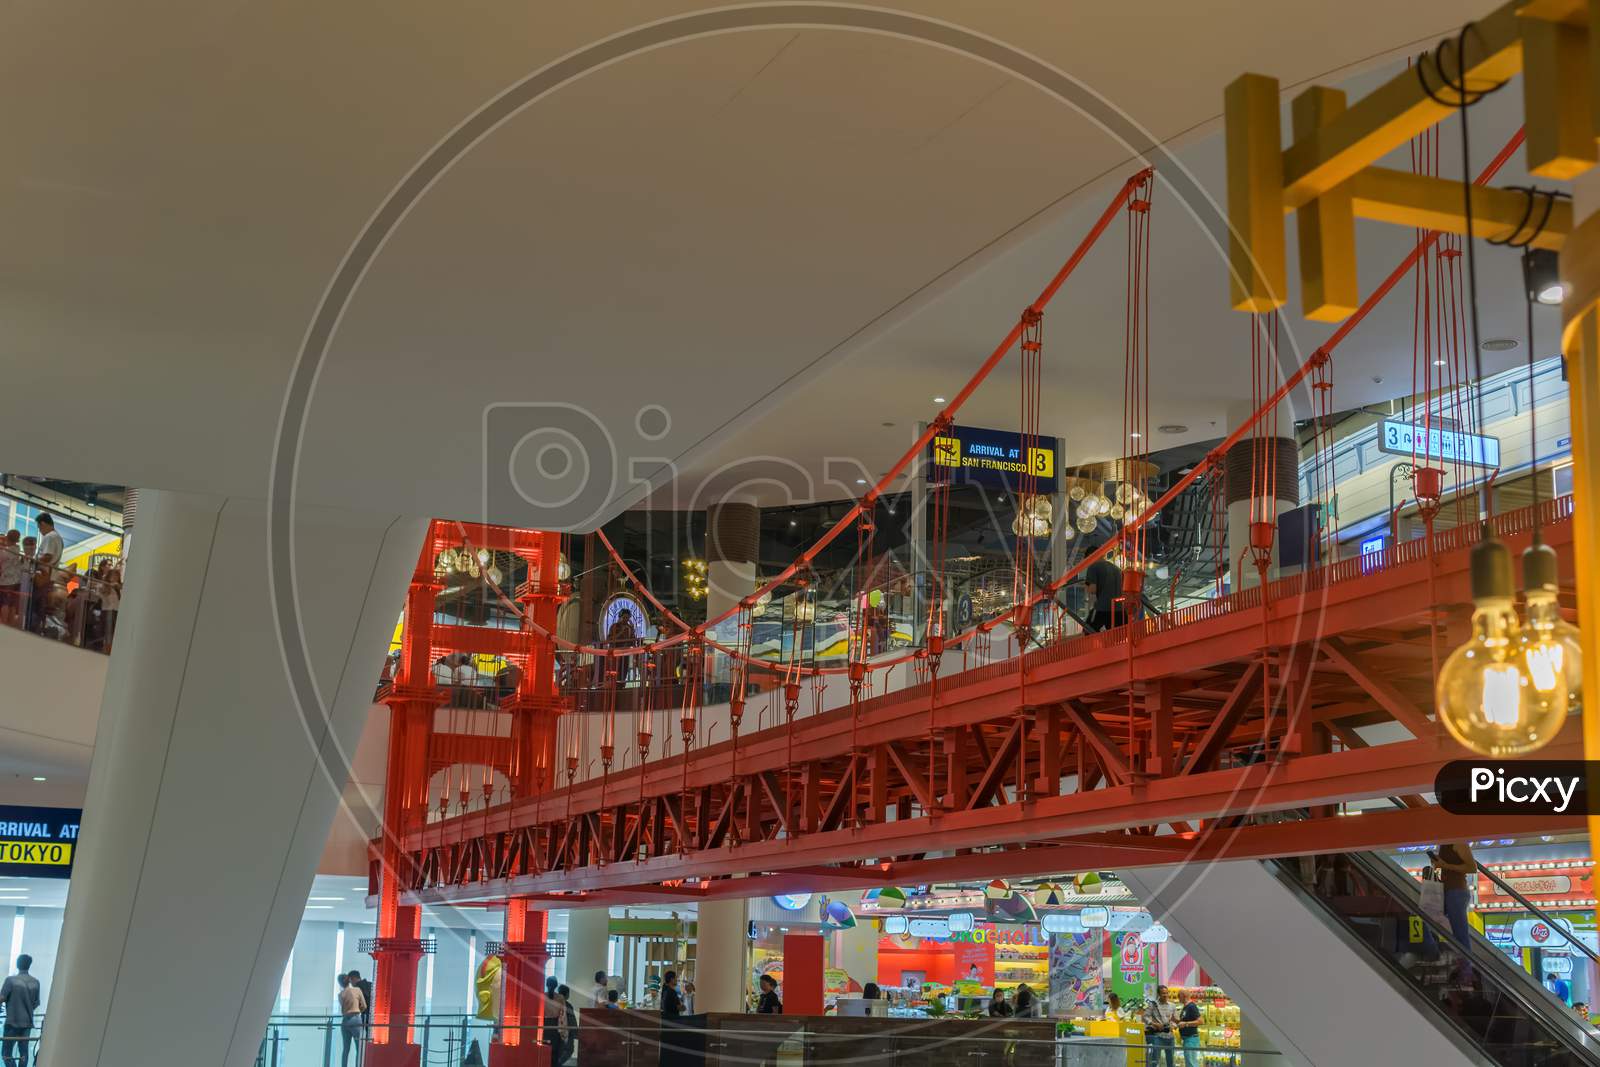 Pattaya,Thailand - October 19,2018:Terminal 21 This Is The Second Floor Of The Big Shopping Mall With Many Shops,Restaurants And A Fake Bridge For Decoration.The Mall Is In Second Road.